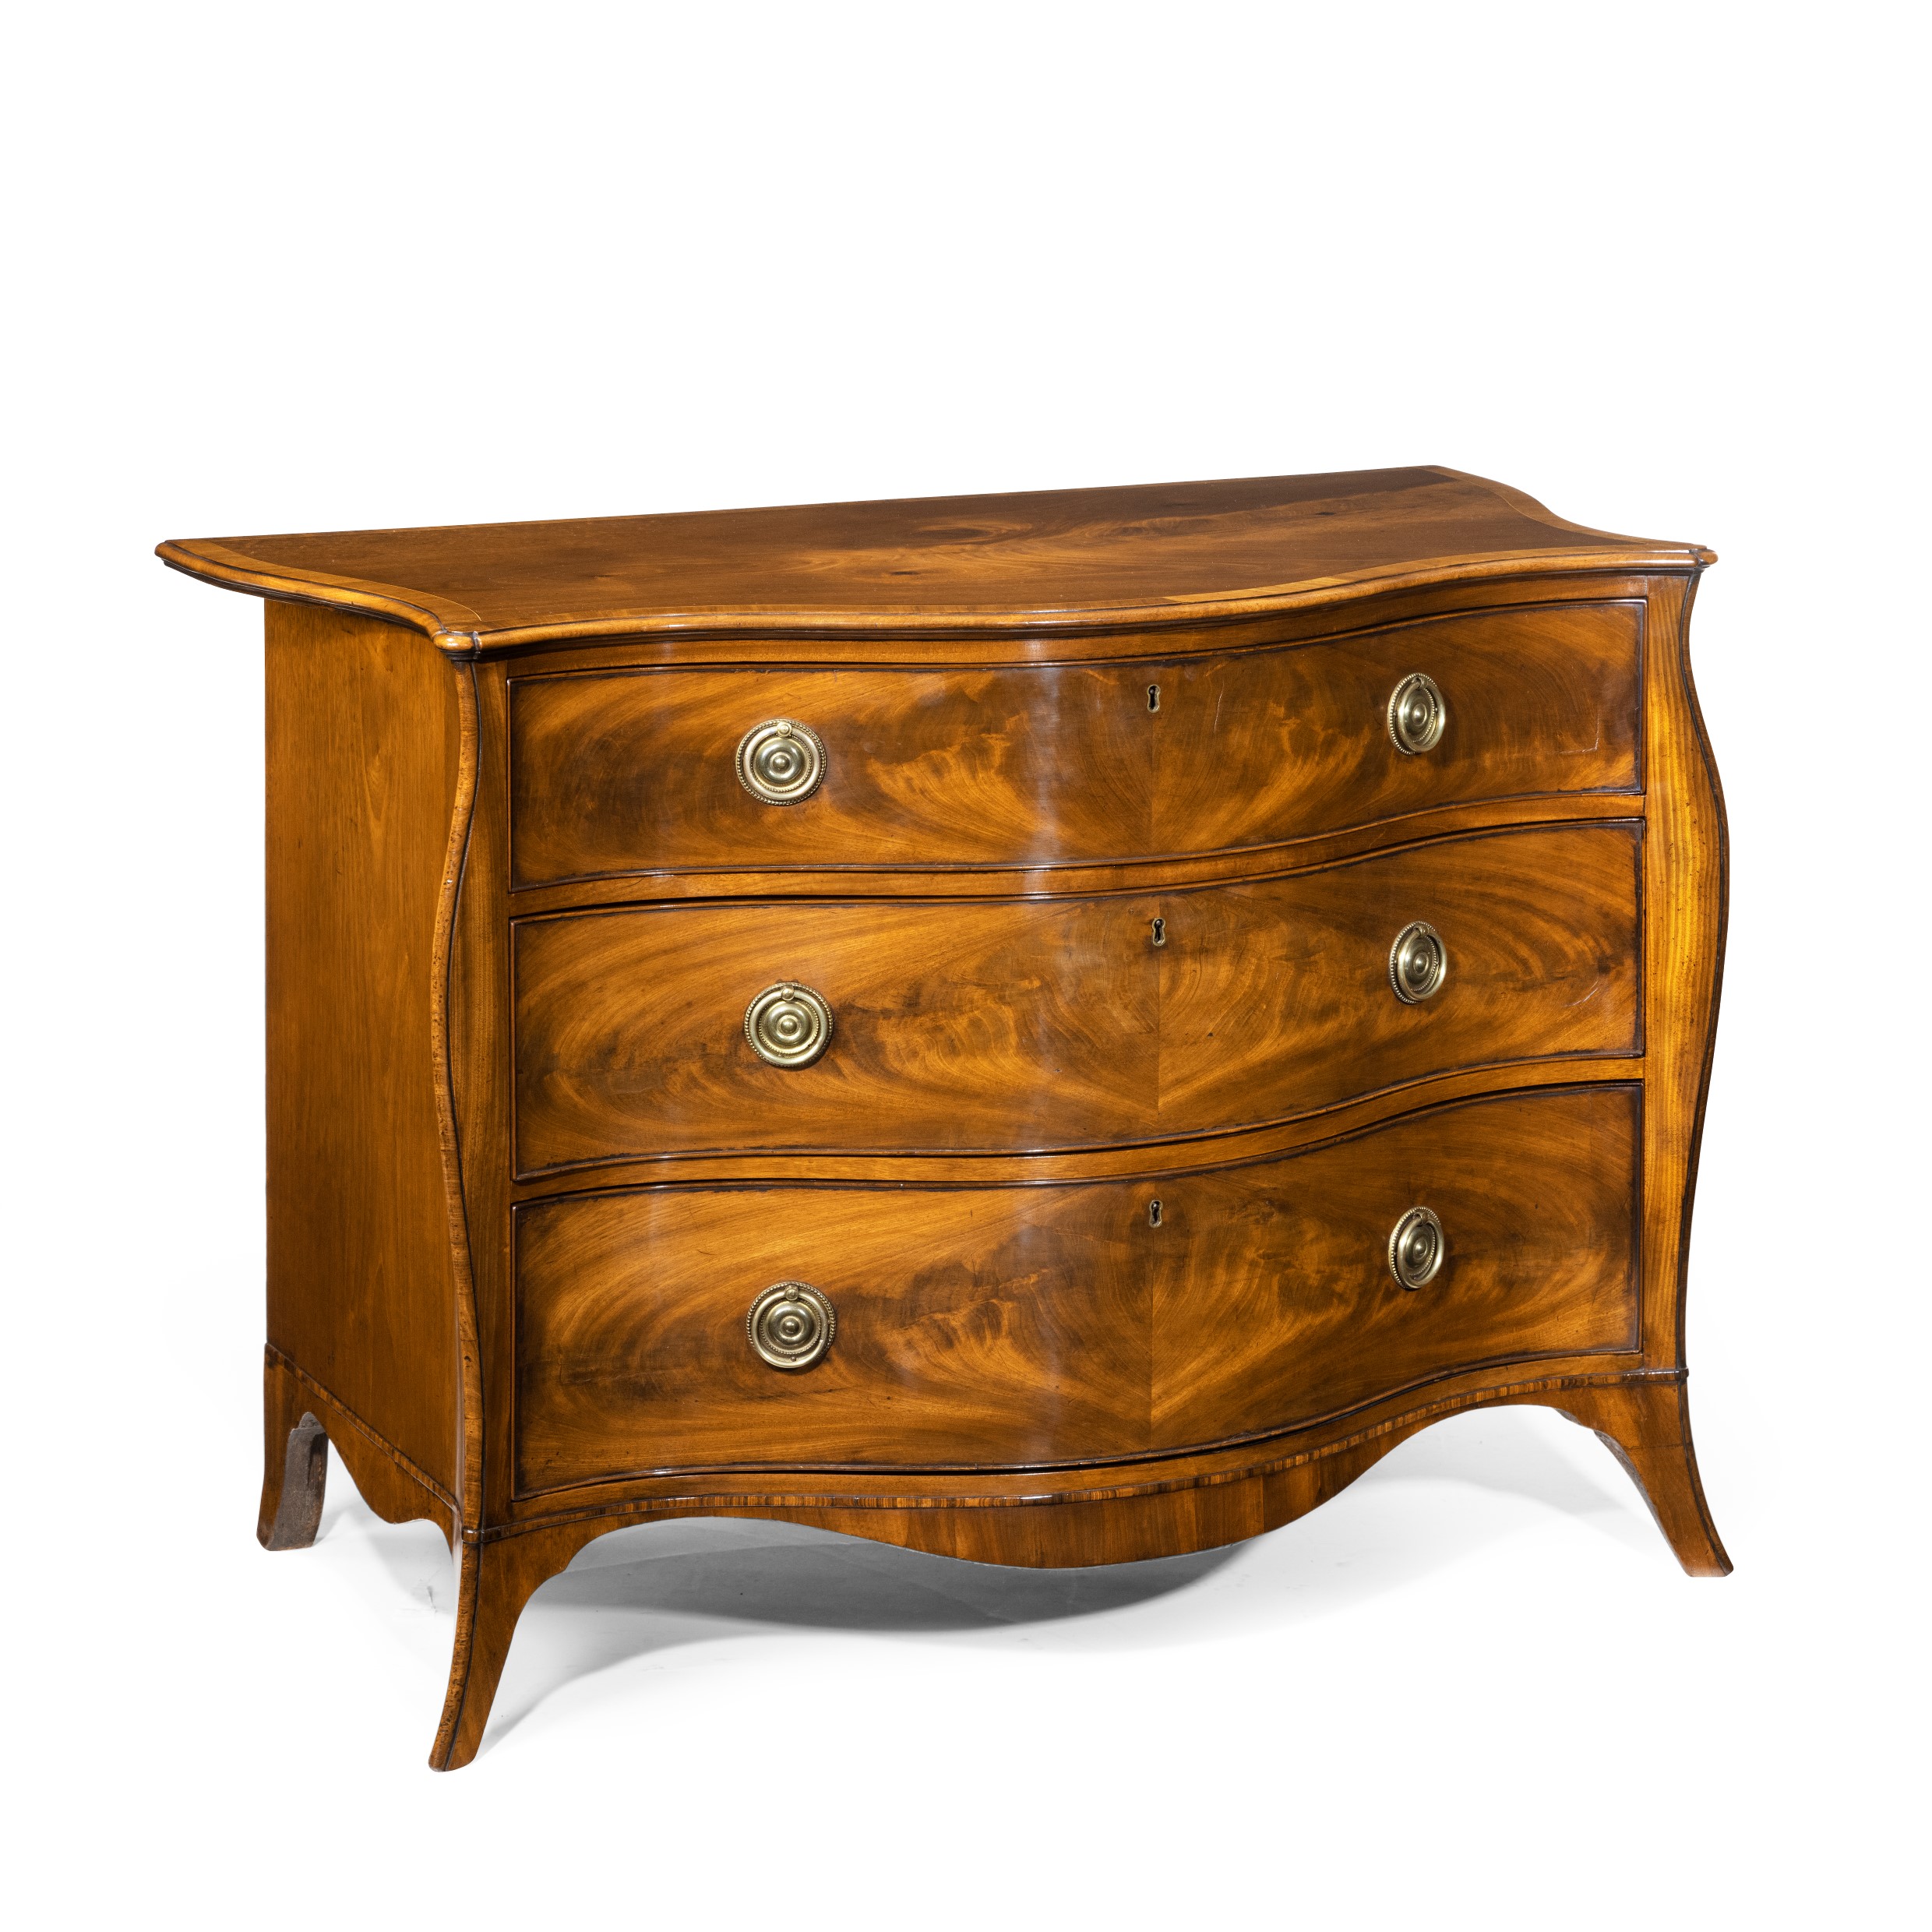 George III Figured Mahogany Serpentine Commode Attributed to Henry Hill